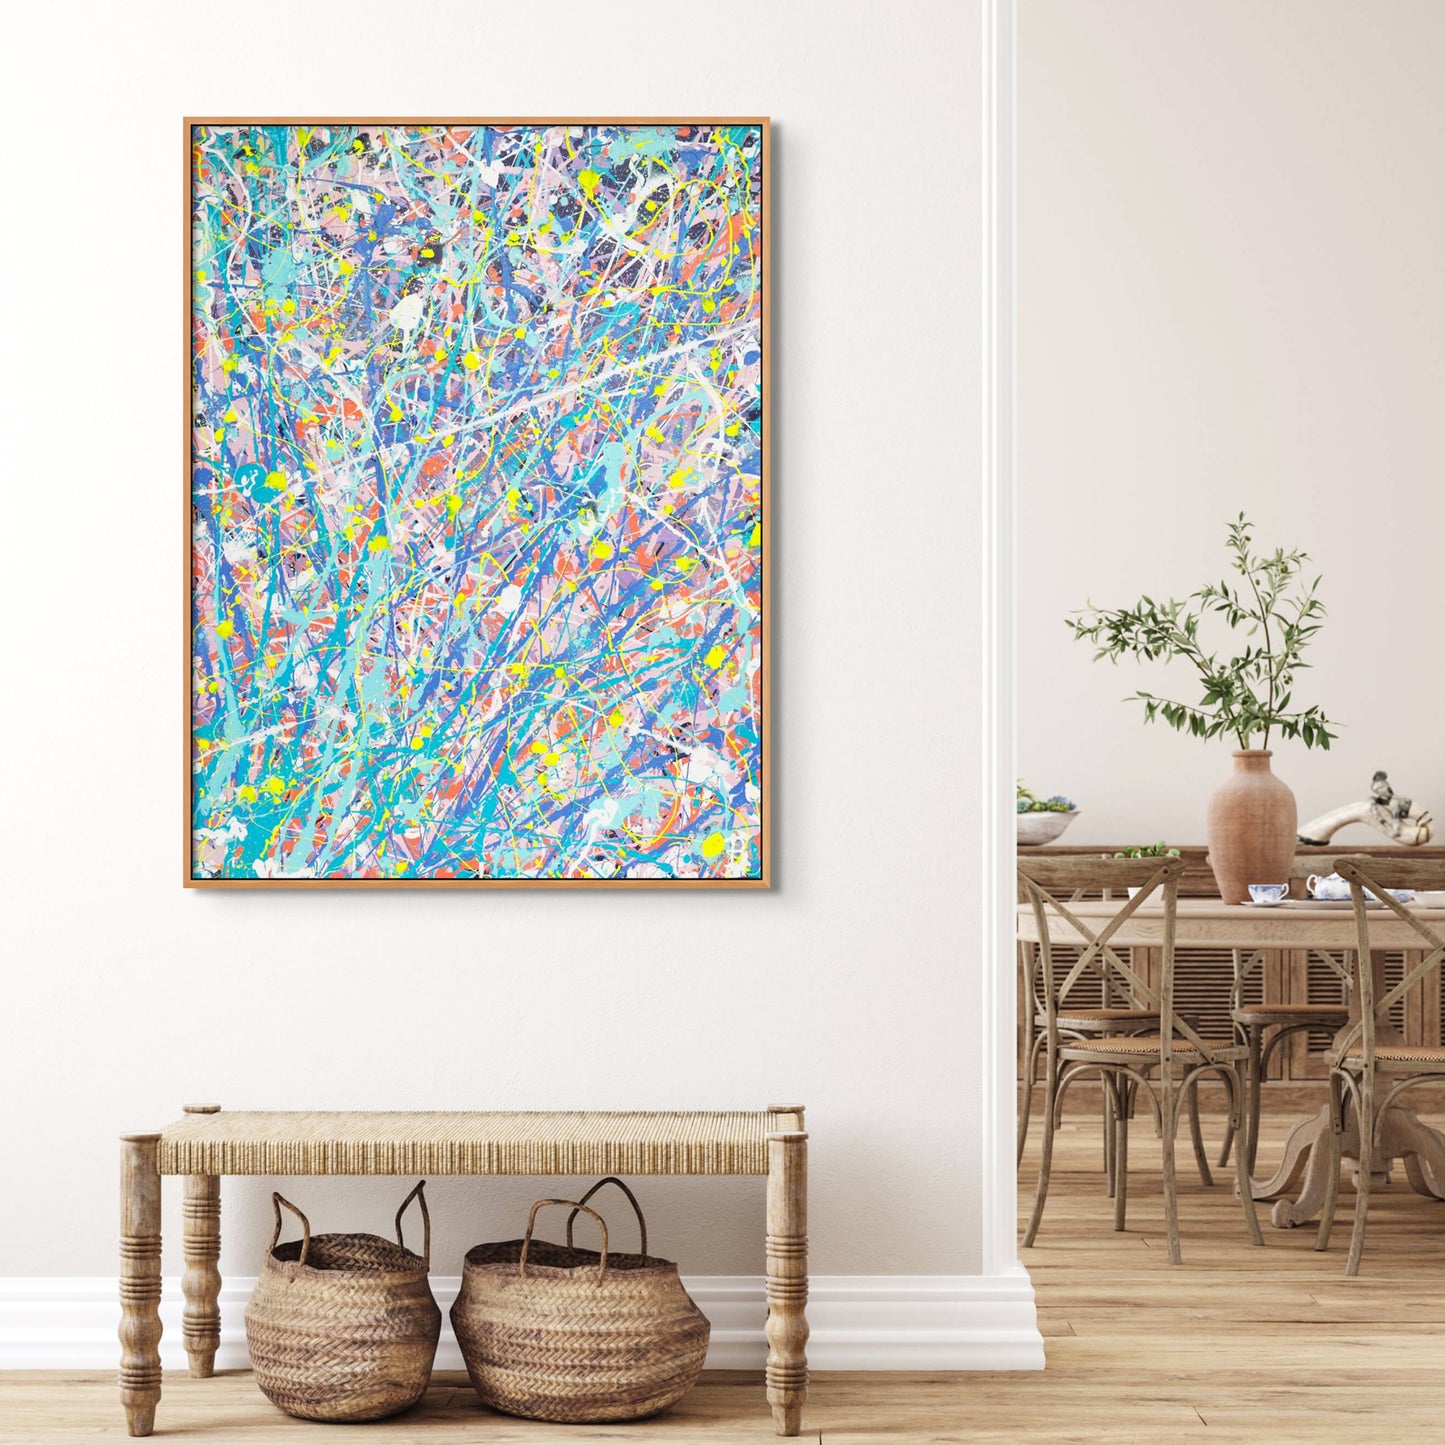 'Iridescence' original abstract expressionism painting on canvas by Bridget Bradley, seen in oak float frame above wicker table and baskets